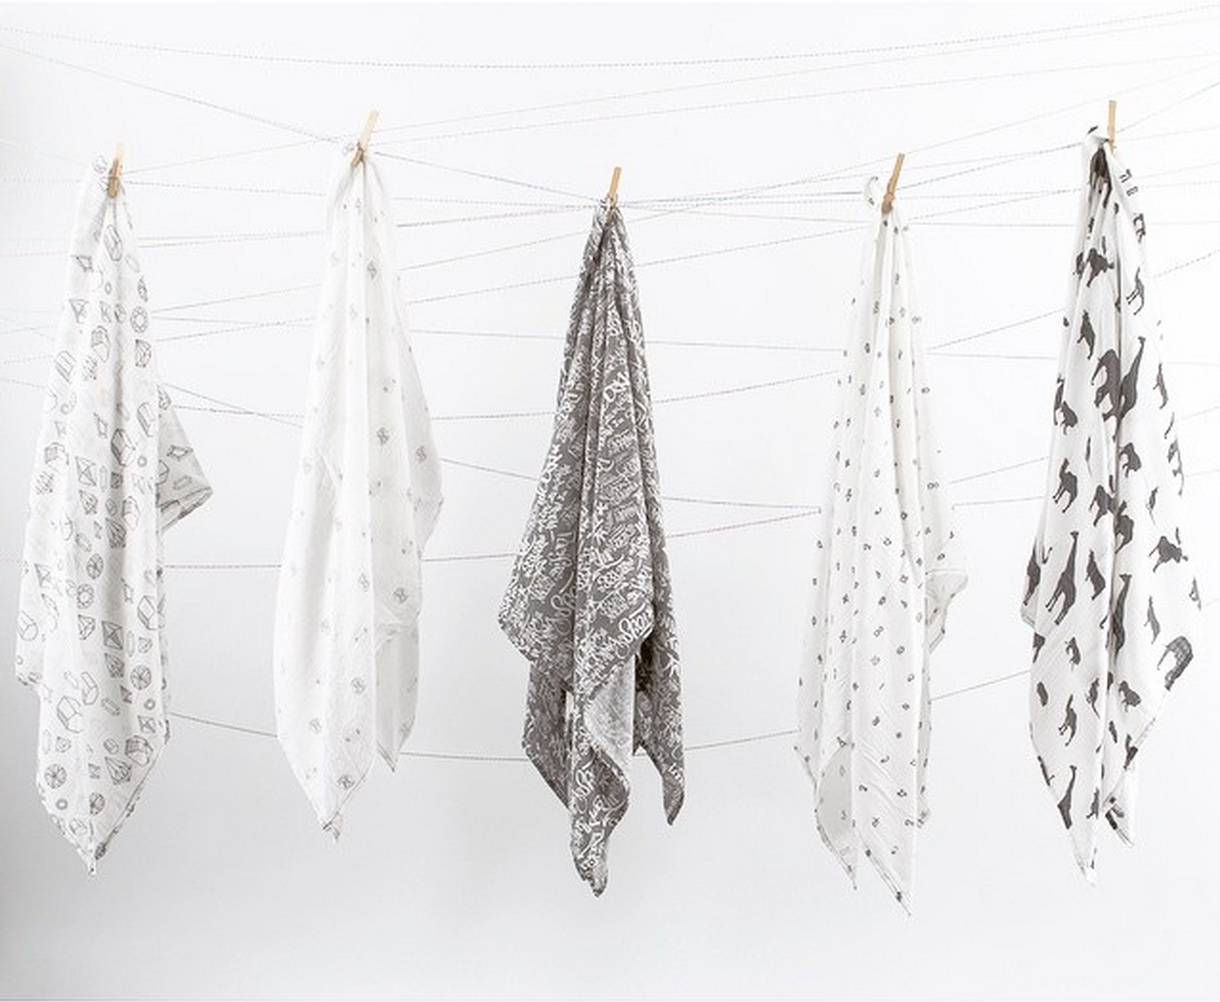 buttermilk babies makes cool, edgy swaddle blankets we love